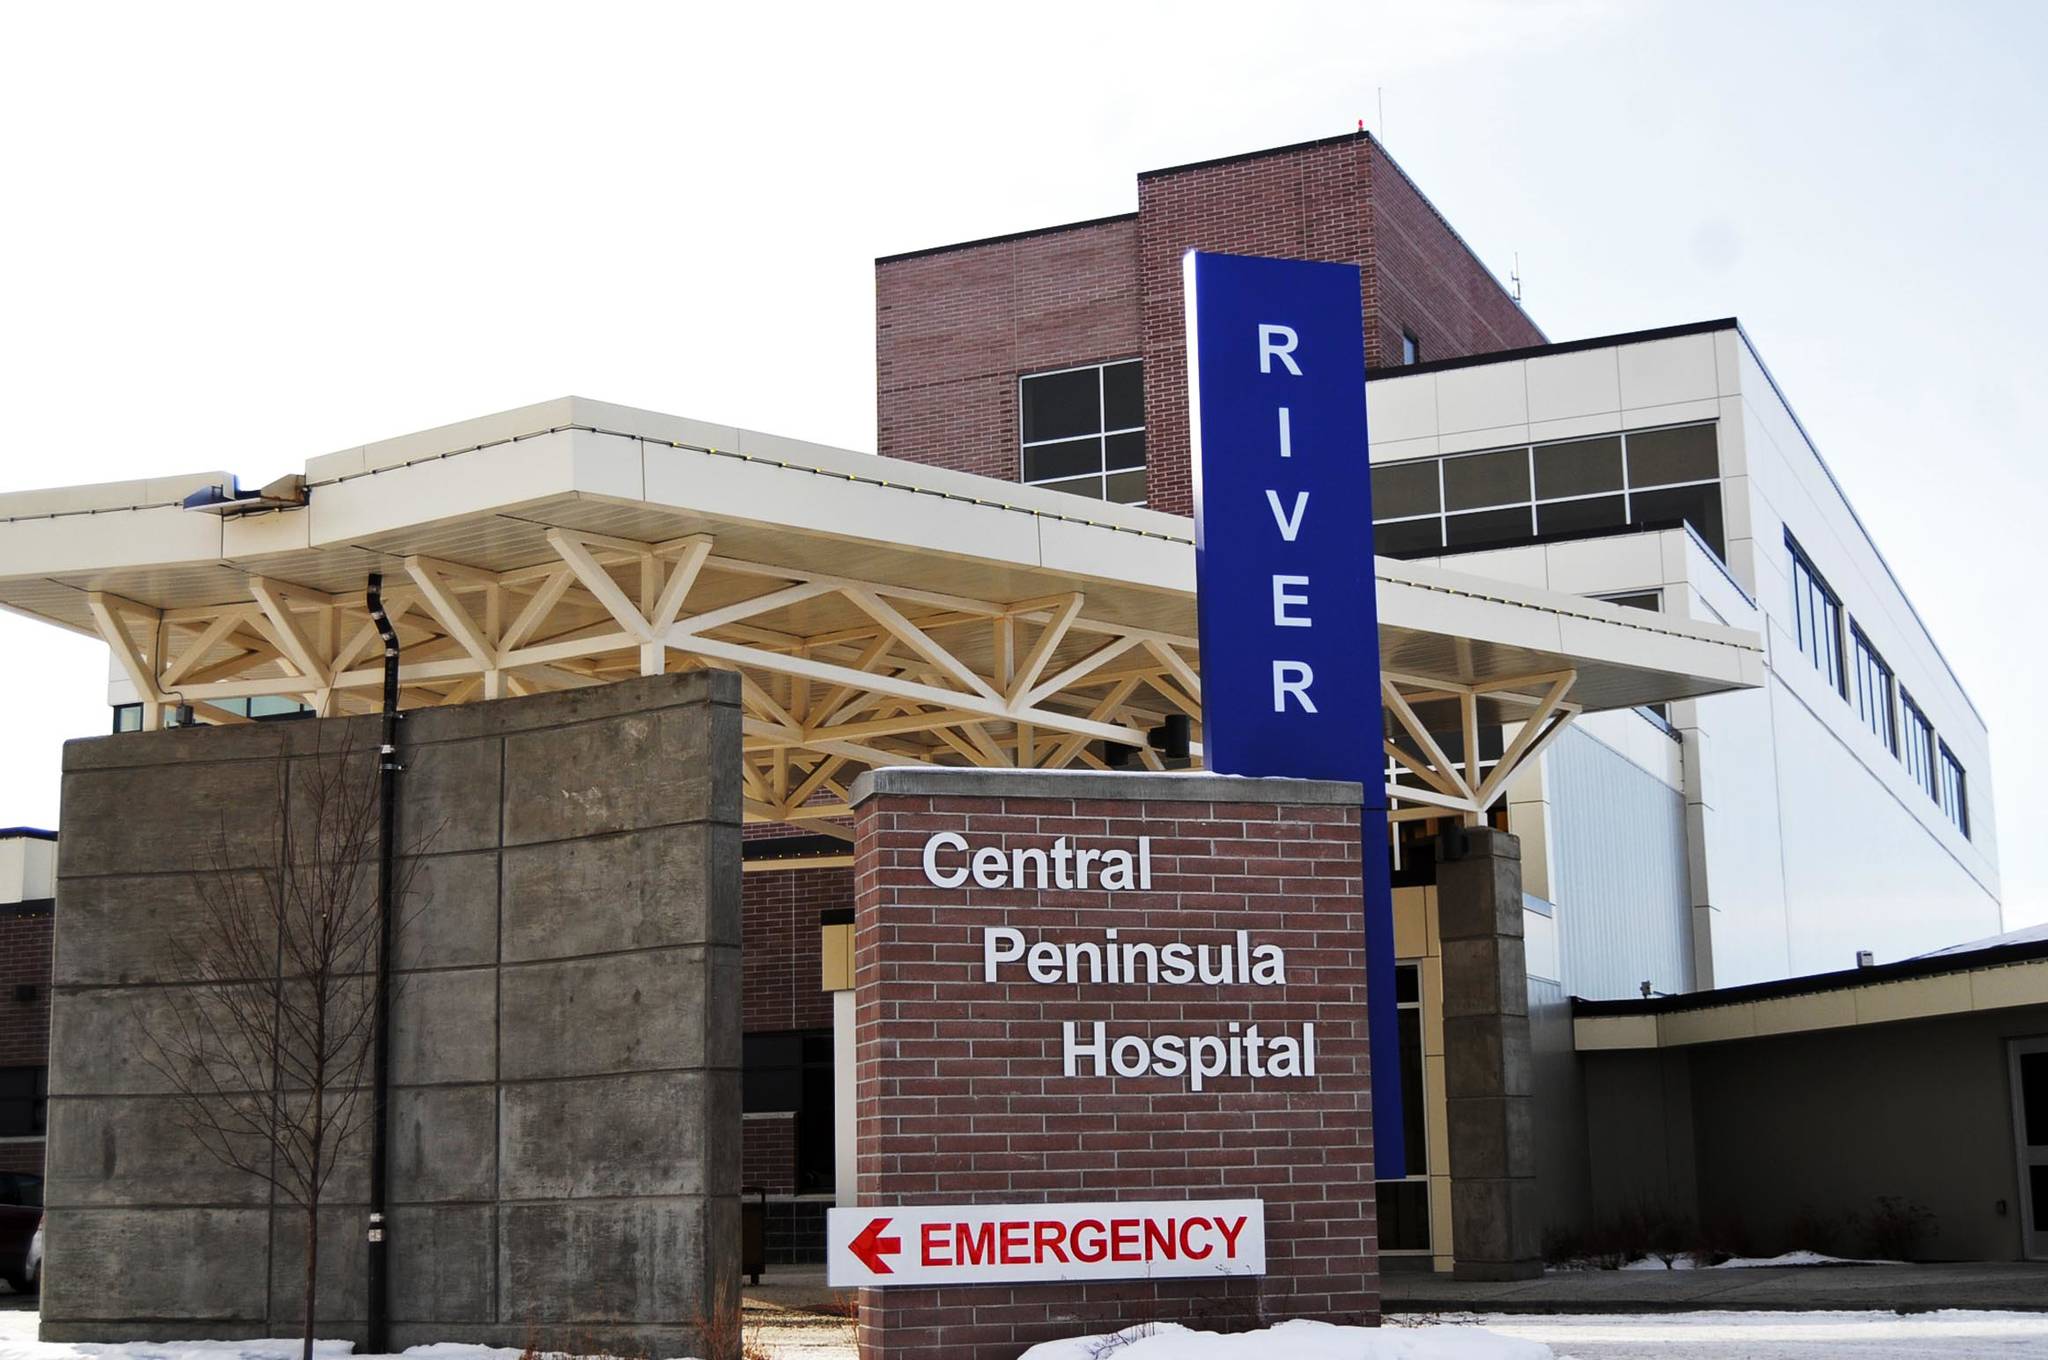 This March 29, 2017 photo shows Central Peninsula Hospital’s River Tower, which houses specialty medical services, in Soldotna, Alaska. The tower was completed in January 2017 as part of a multi-year service and infrastructure expansion at the hospital. (Photo by Elizabeth Earl/Peninsula Clarion)